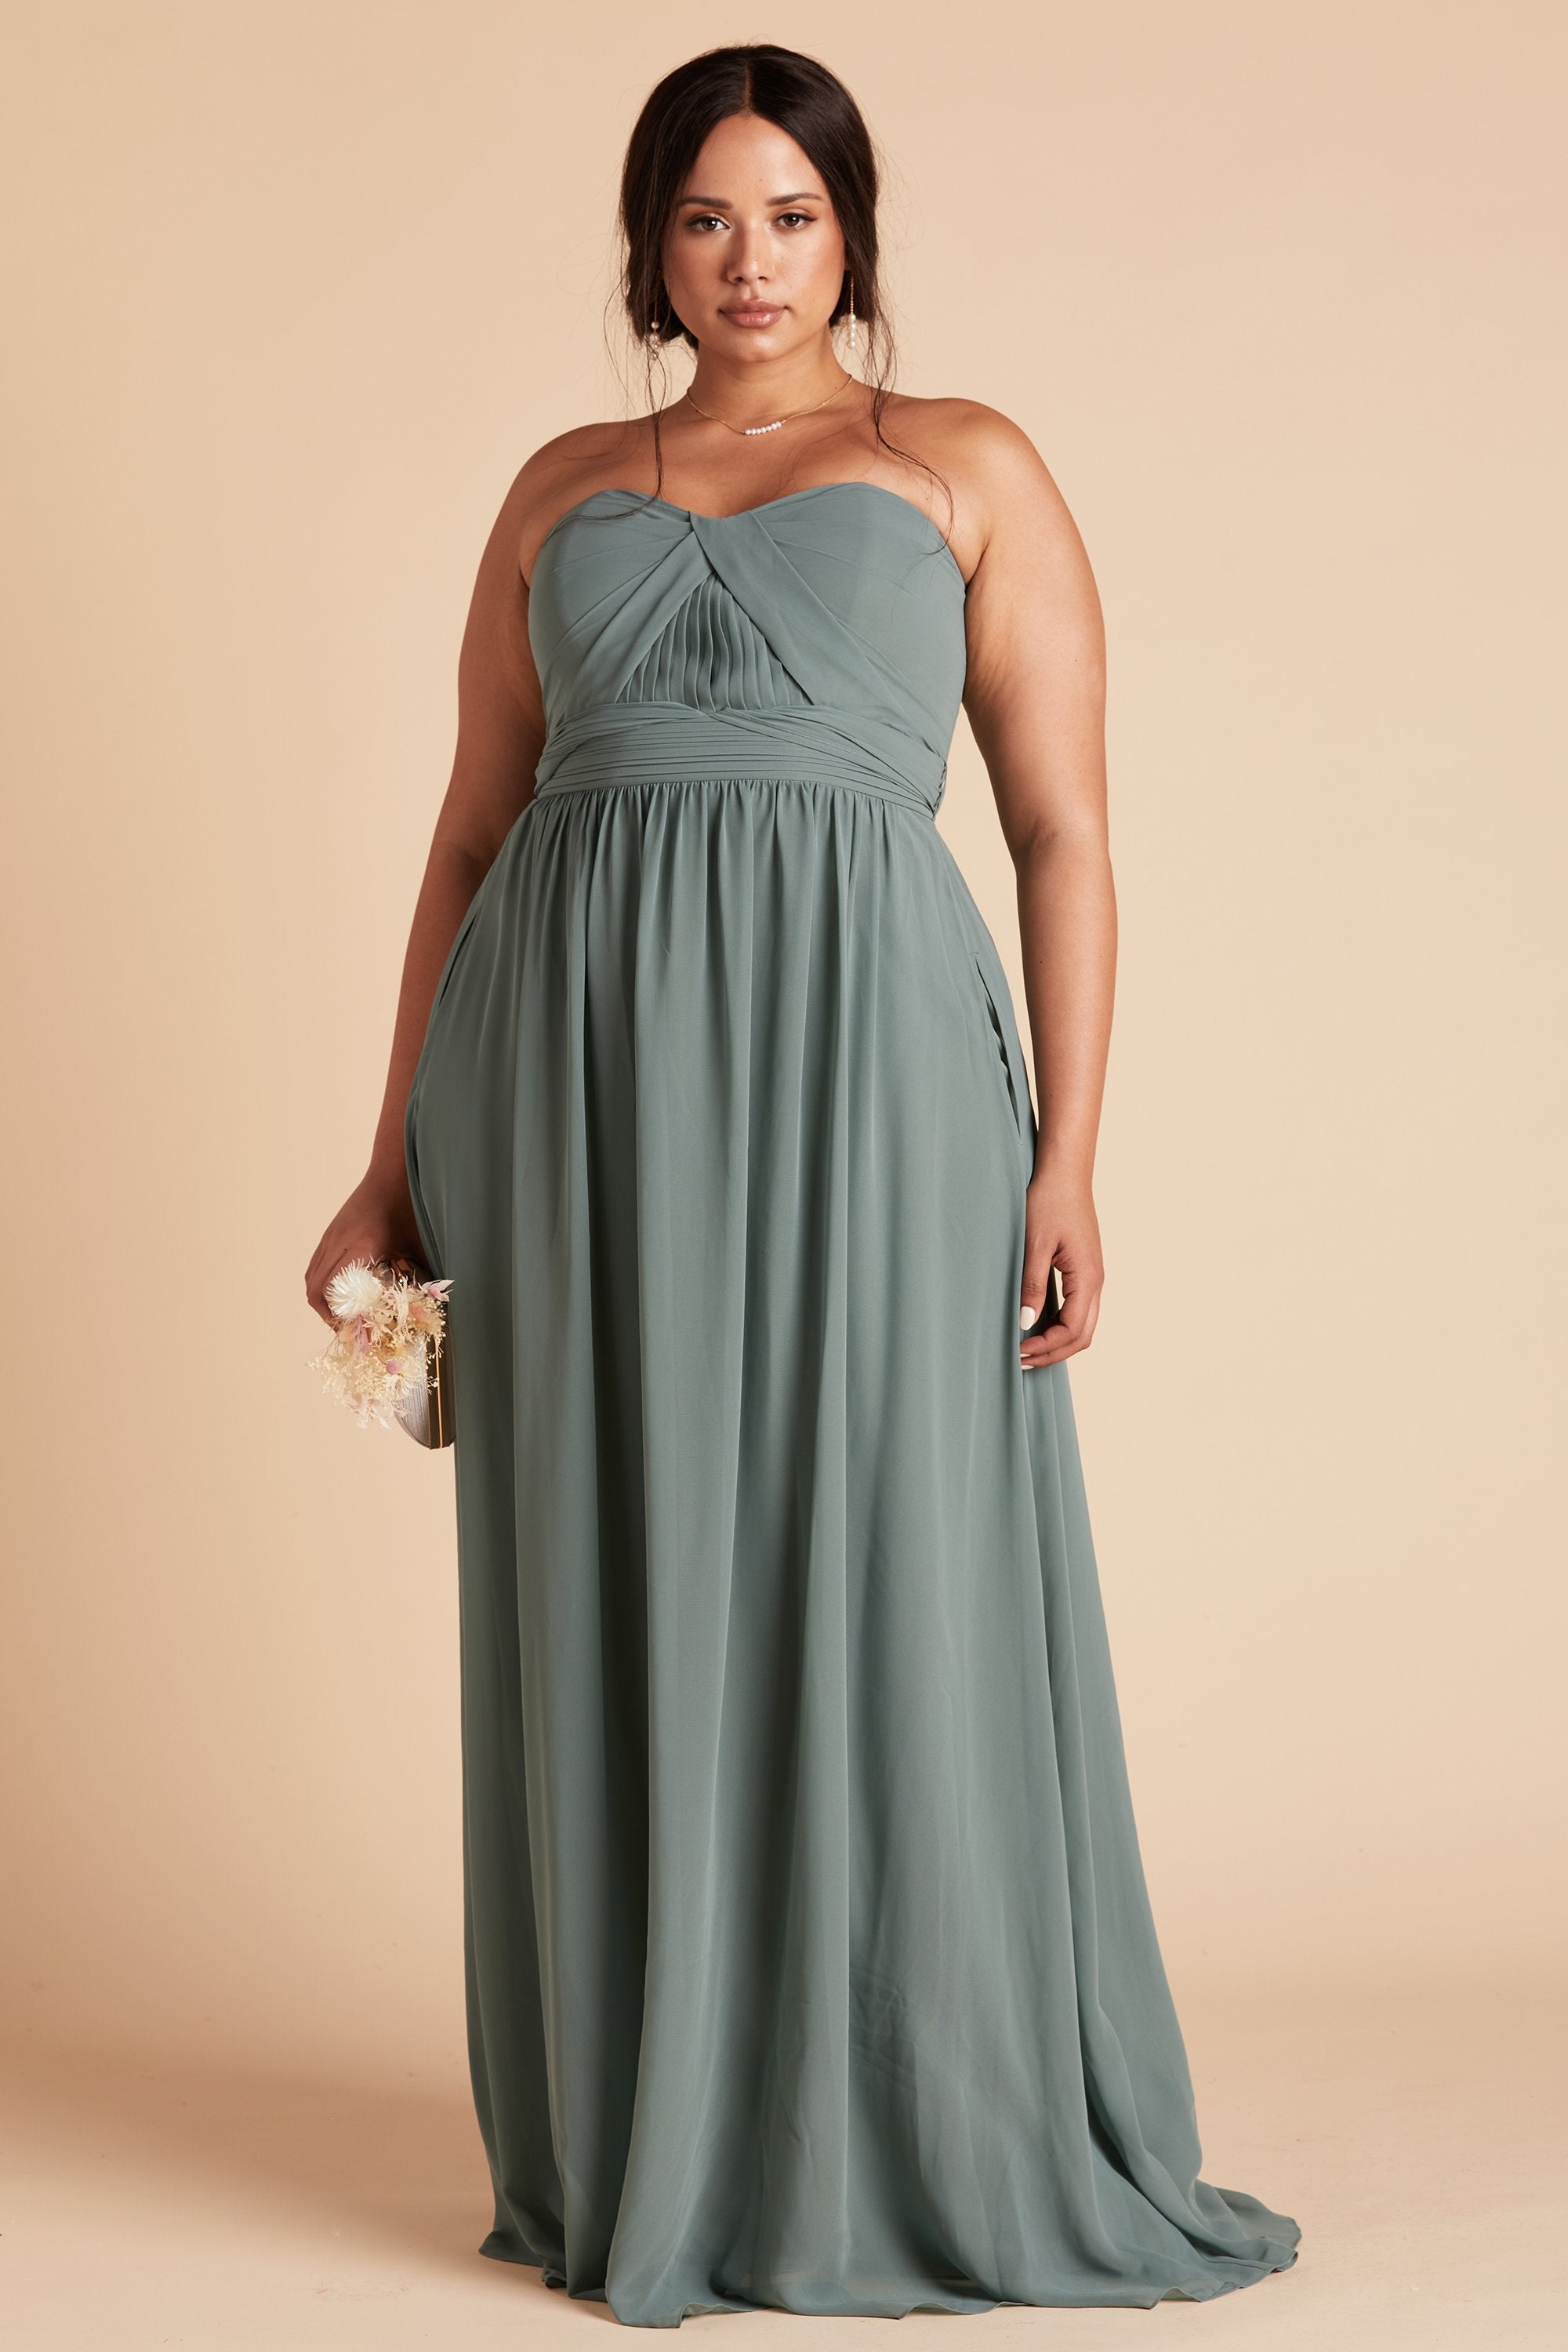 Front view of the Grace Convertible Plus Size Bridesmaid Dress in sea glass chiffon by Birdy Grey features a sweetheart neckline and a flowing floor-length skirt.